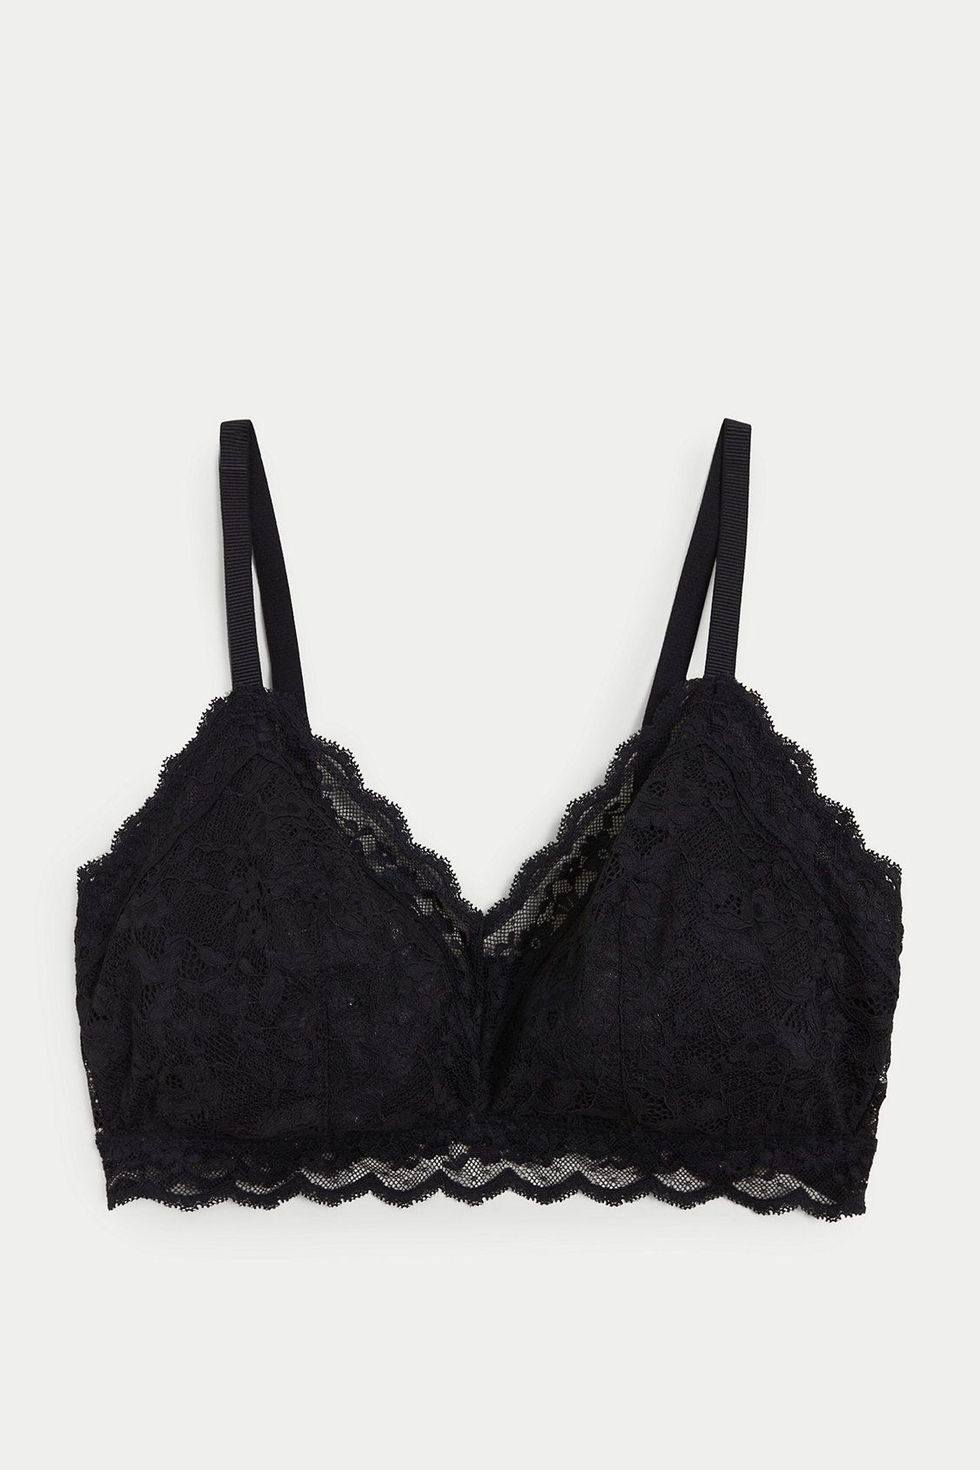 M&S SUPERSOFT NON WIRED SEAMFREE LONGLINE T SHIRT BRA with Lace